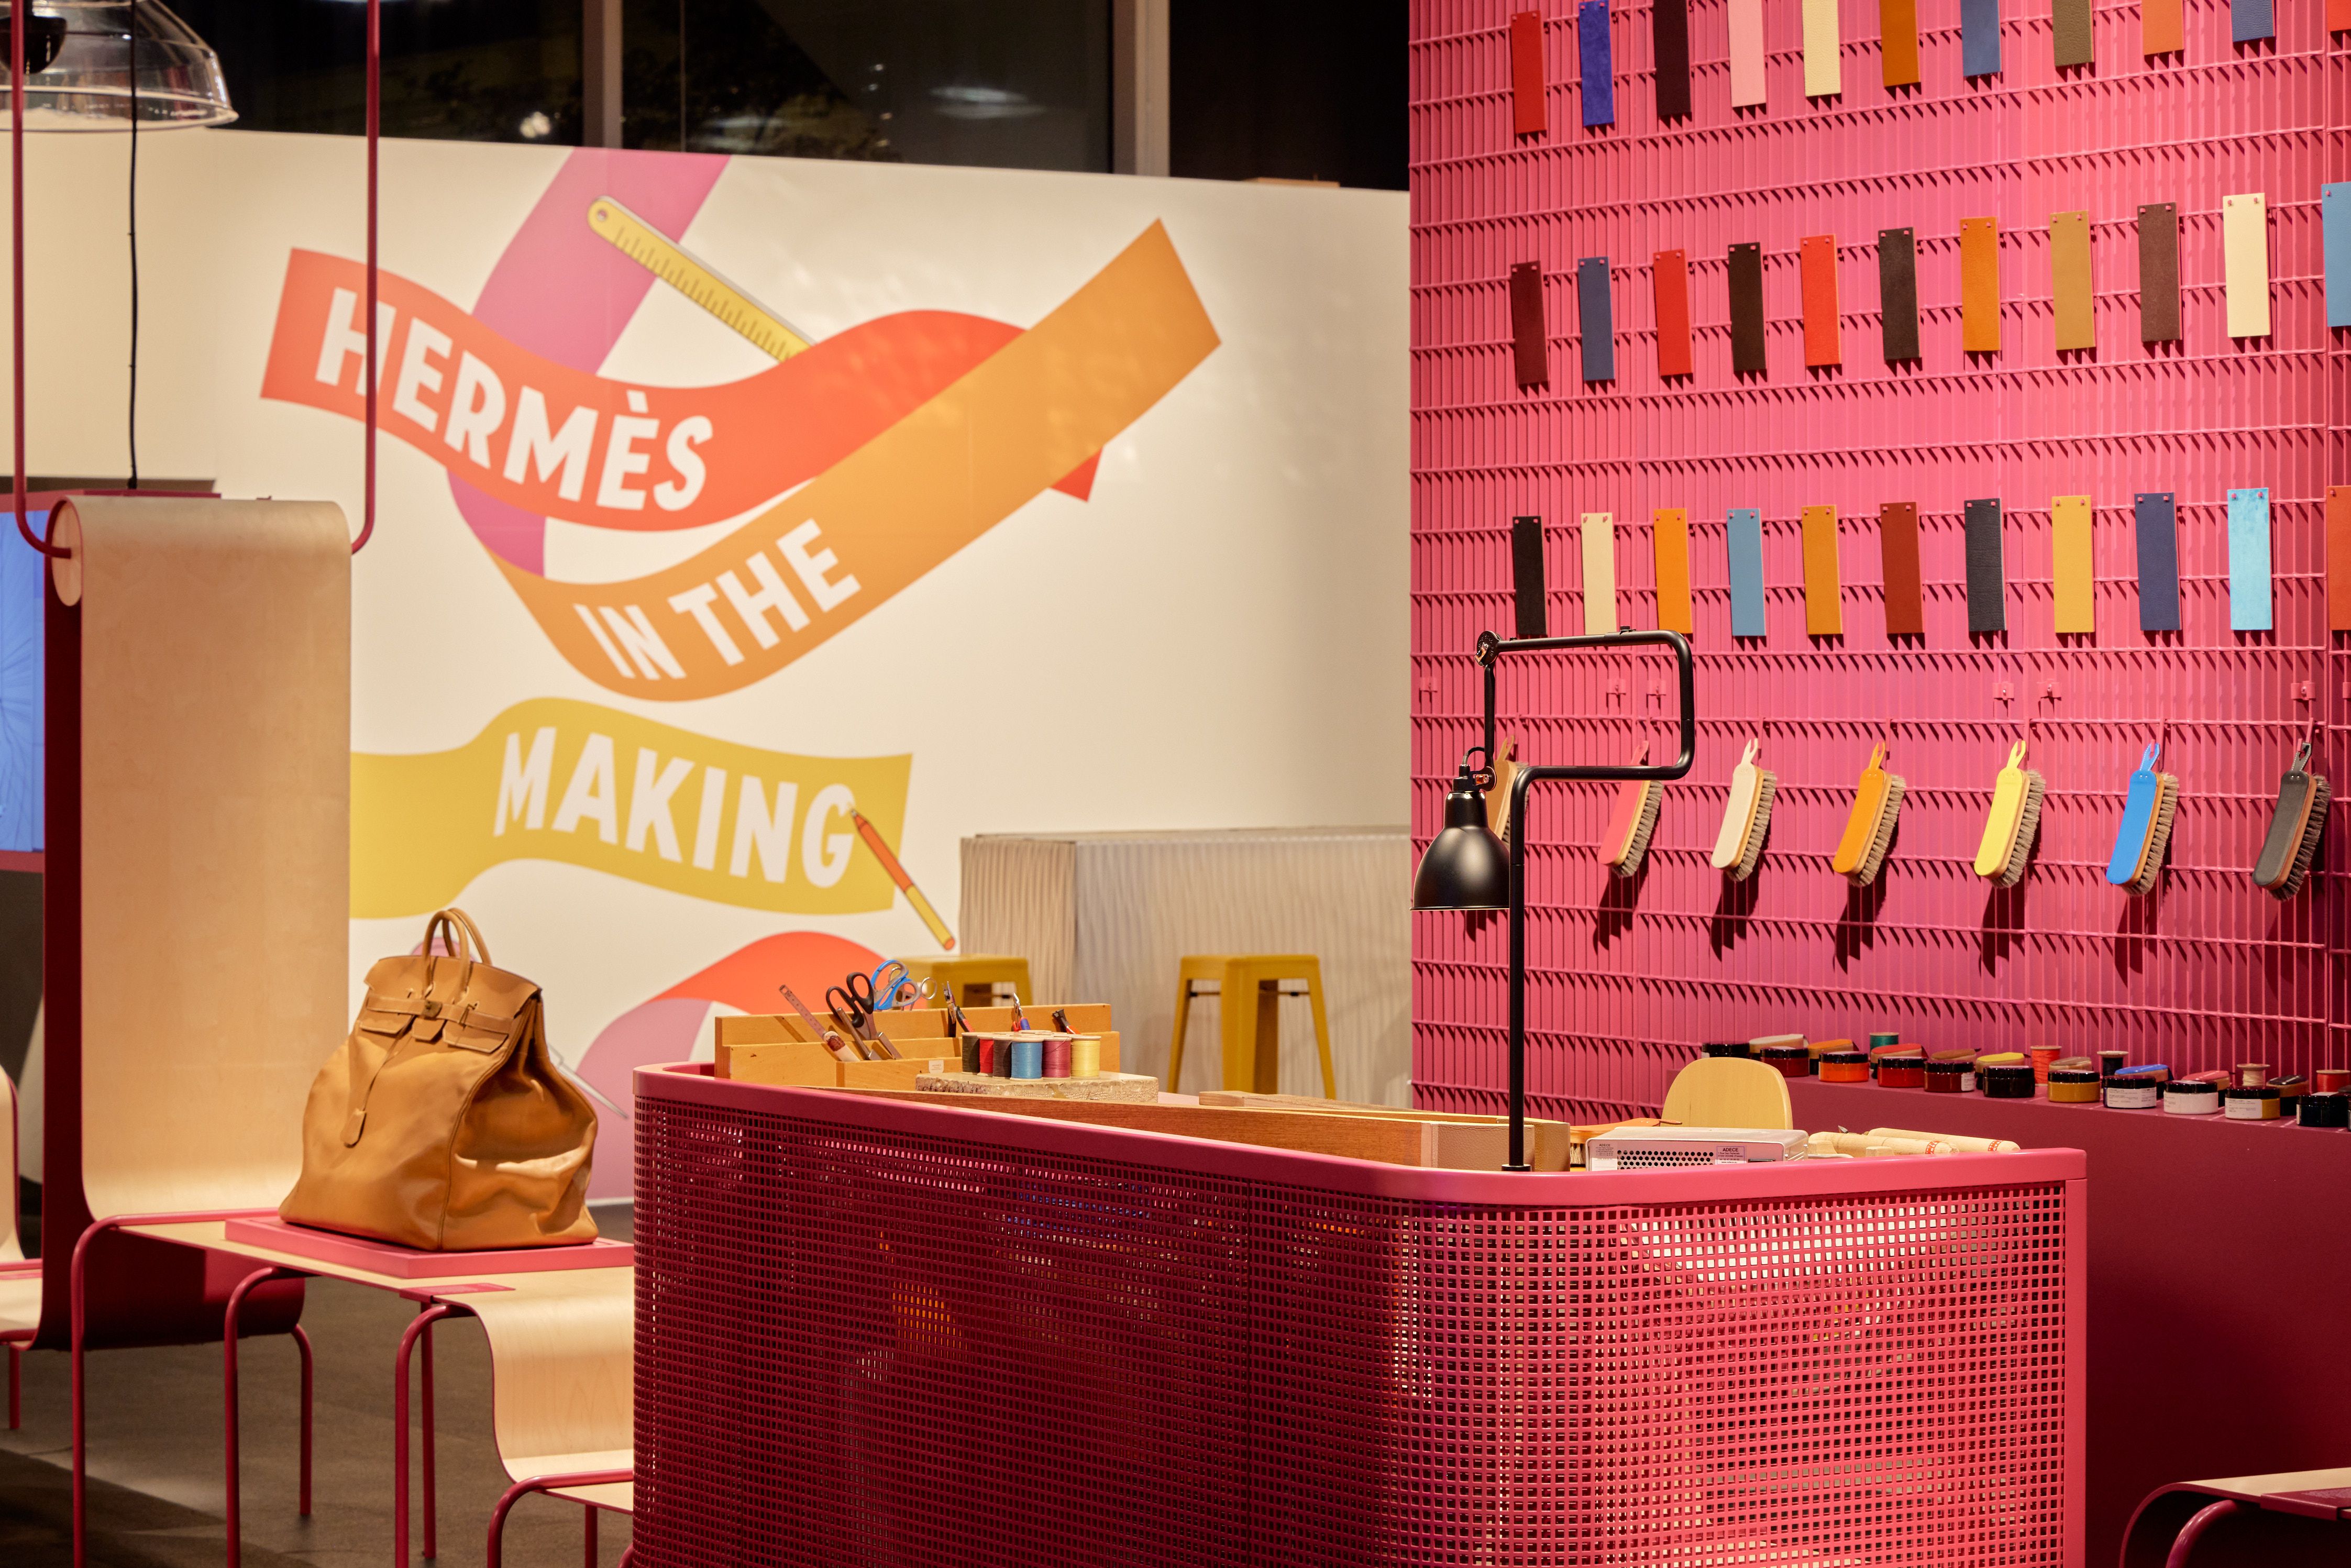 Step Inside the Hermès Atelier at an Hermès 2022 Traveling Exhibition